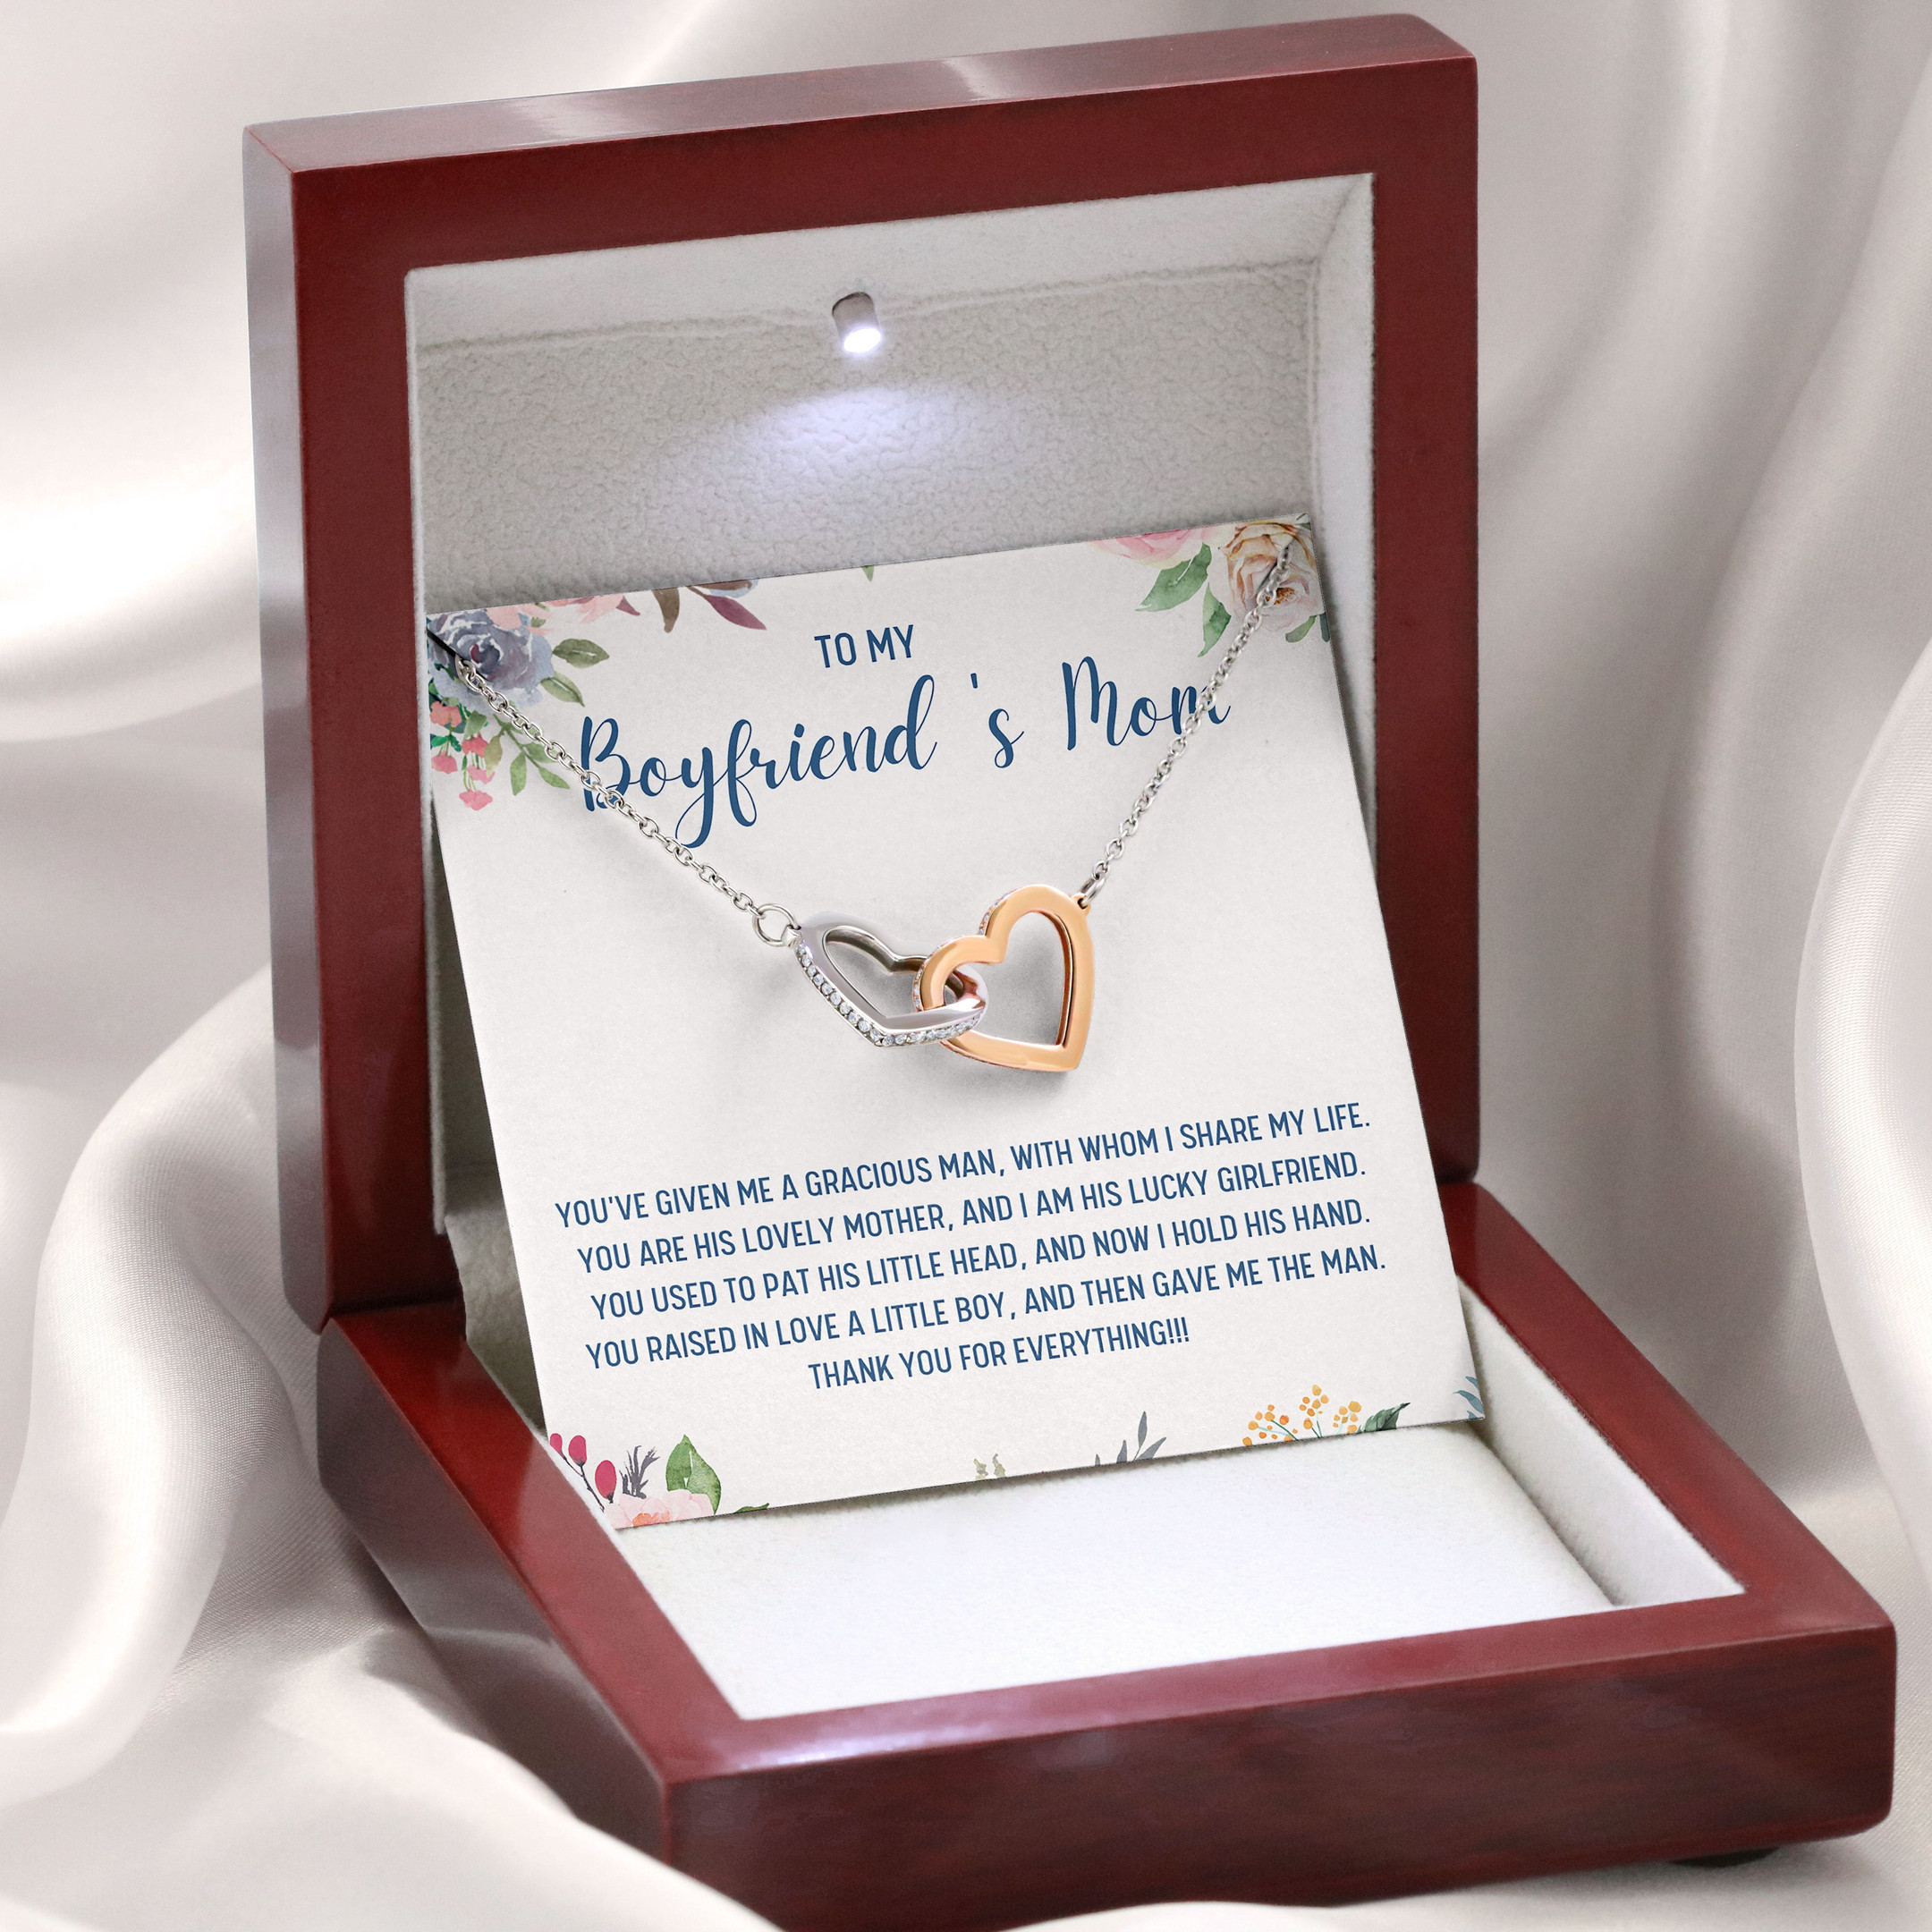 Mom Necklace To My Boyfriend's Mom You've Given Me A Gracious Man Interlocking Hearts Necklace